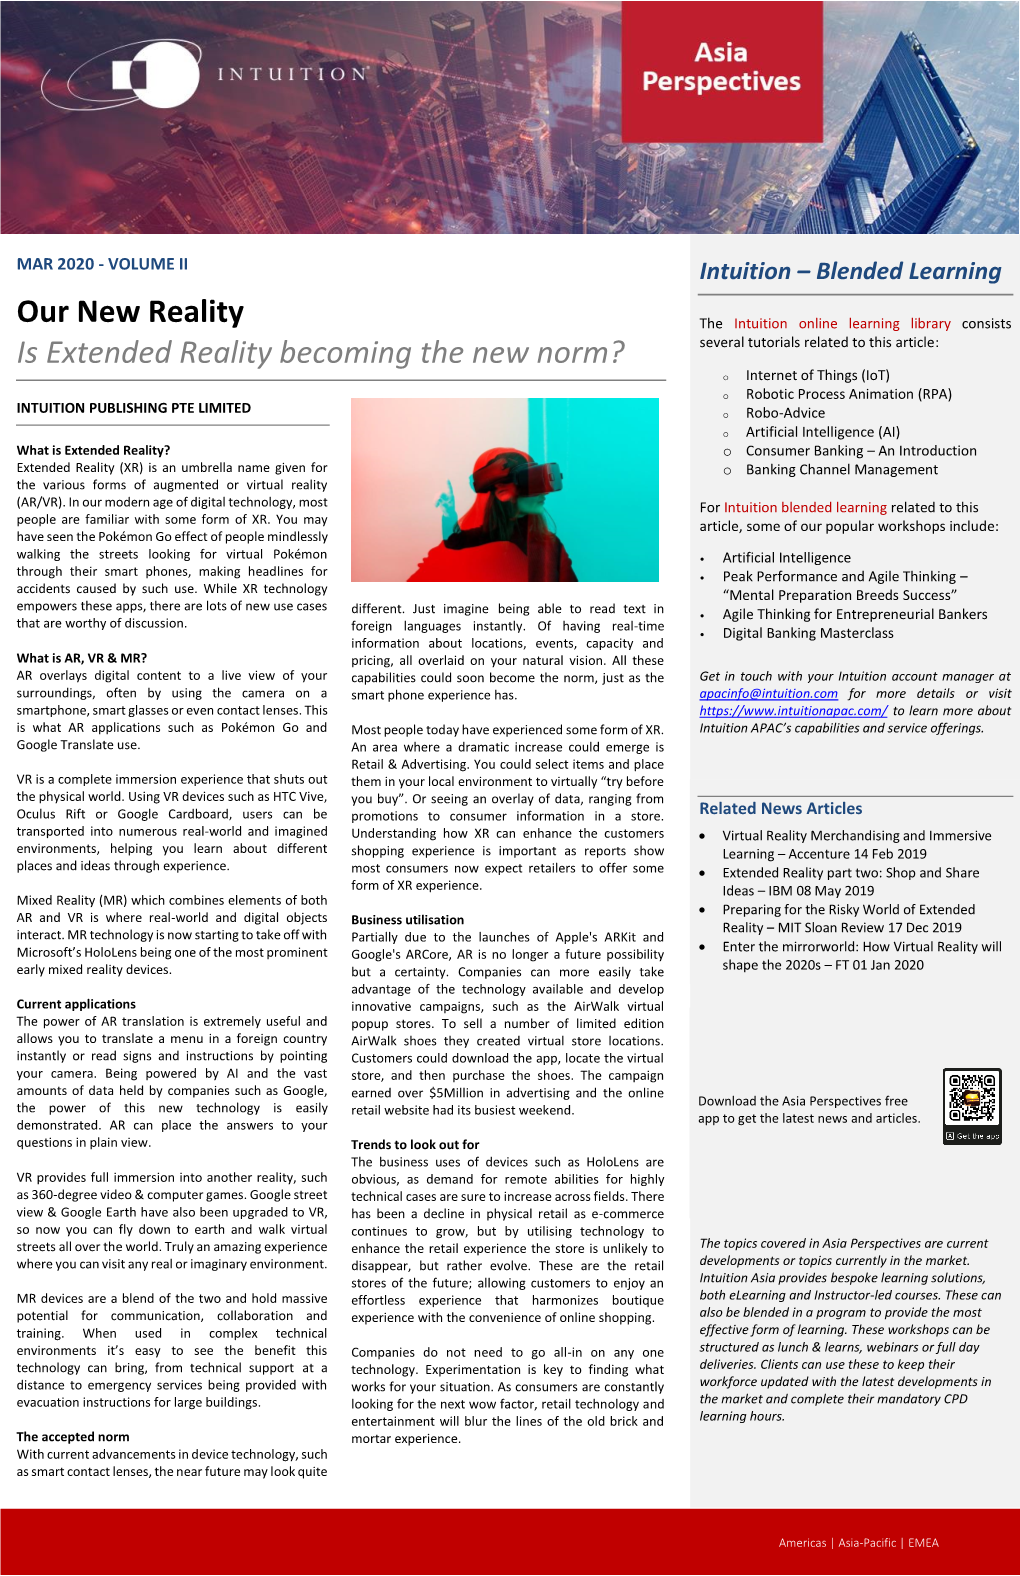 Our New Reality Is Extended Reality Becoming the New Norm?